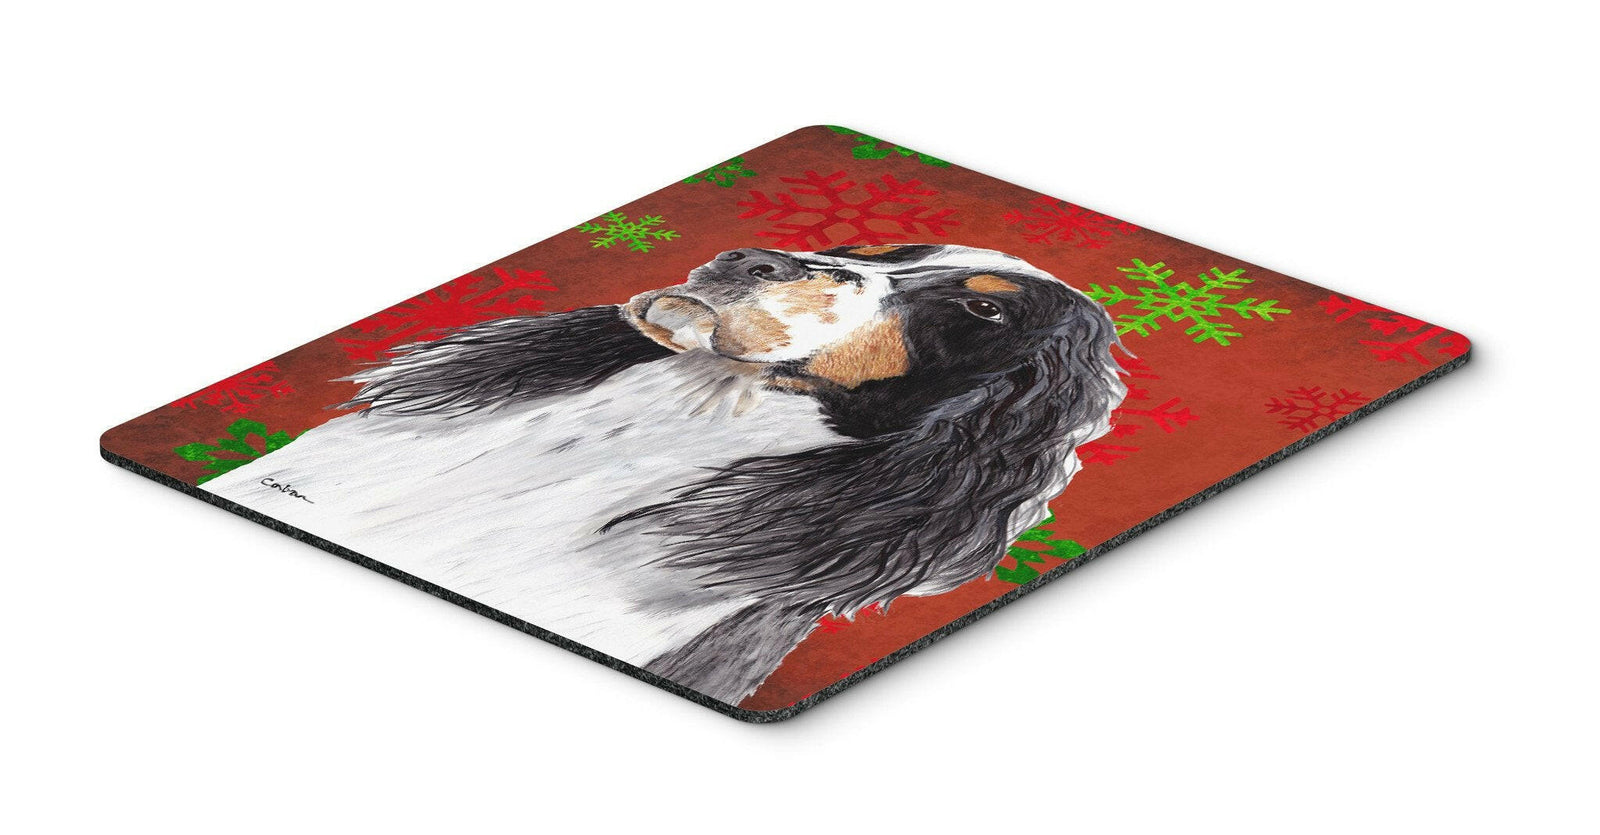 Springer Spaniel Red and Green Snowflakes Christmas Mouse Pad, Hot Pad Trivet by Caroline's Treasures